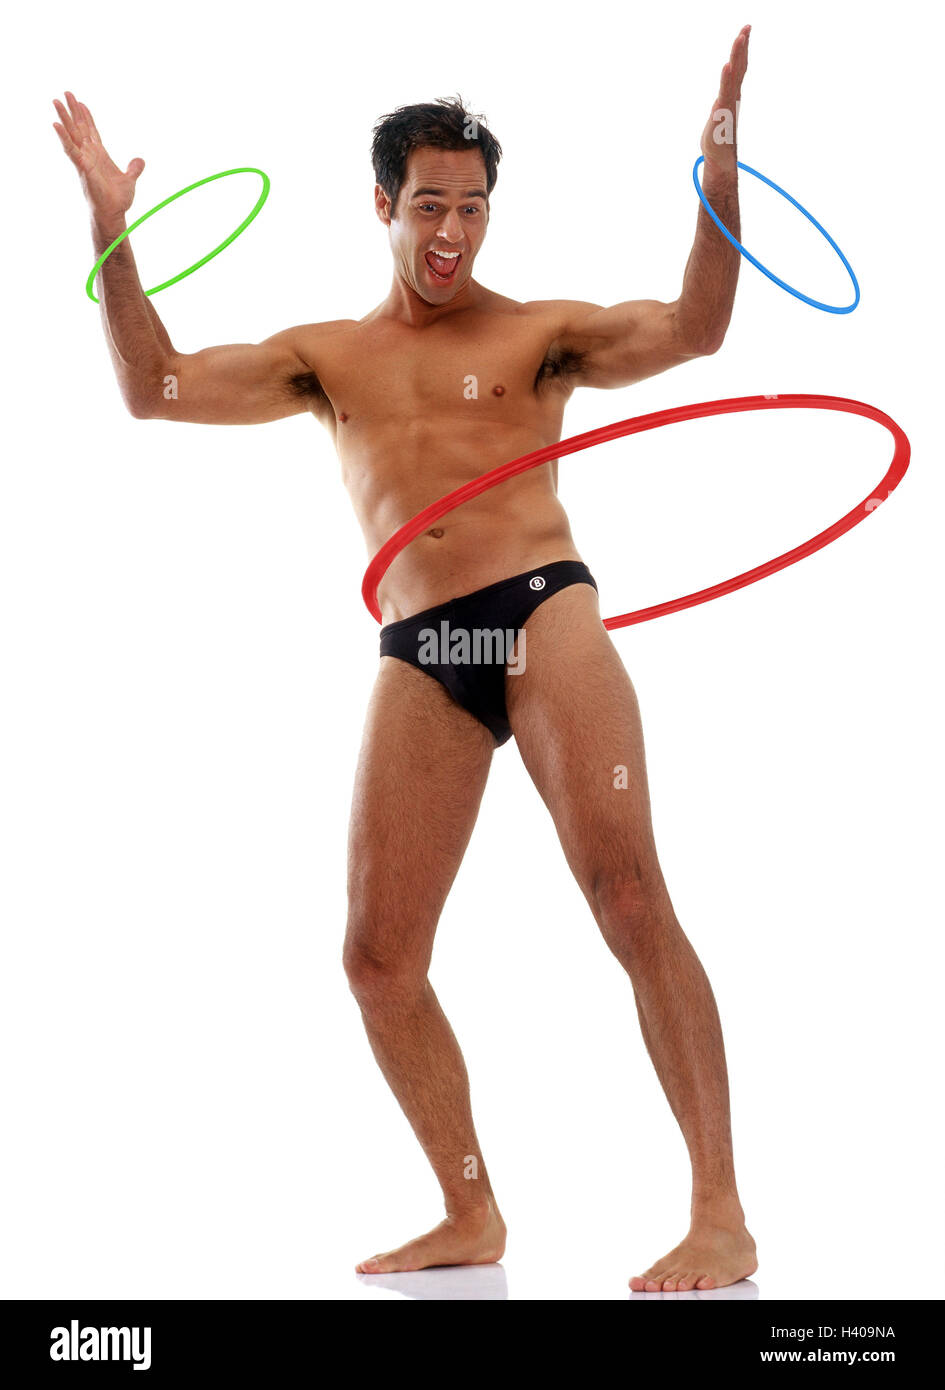 Man, swimming trunks, hula Hoop tyre, sizes, differently, gesture, Men,  free upper part of the Body, swimwear, laugh, glad, fun, acrobatics,  high-spirited, tyres, game, toys, studio, cut out Stock Photo - Alamy